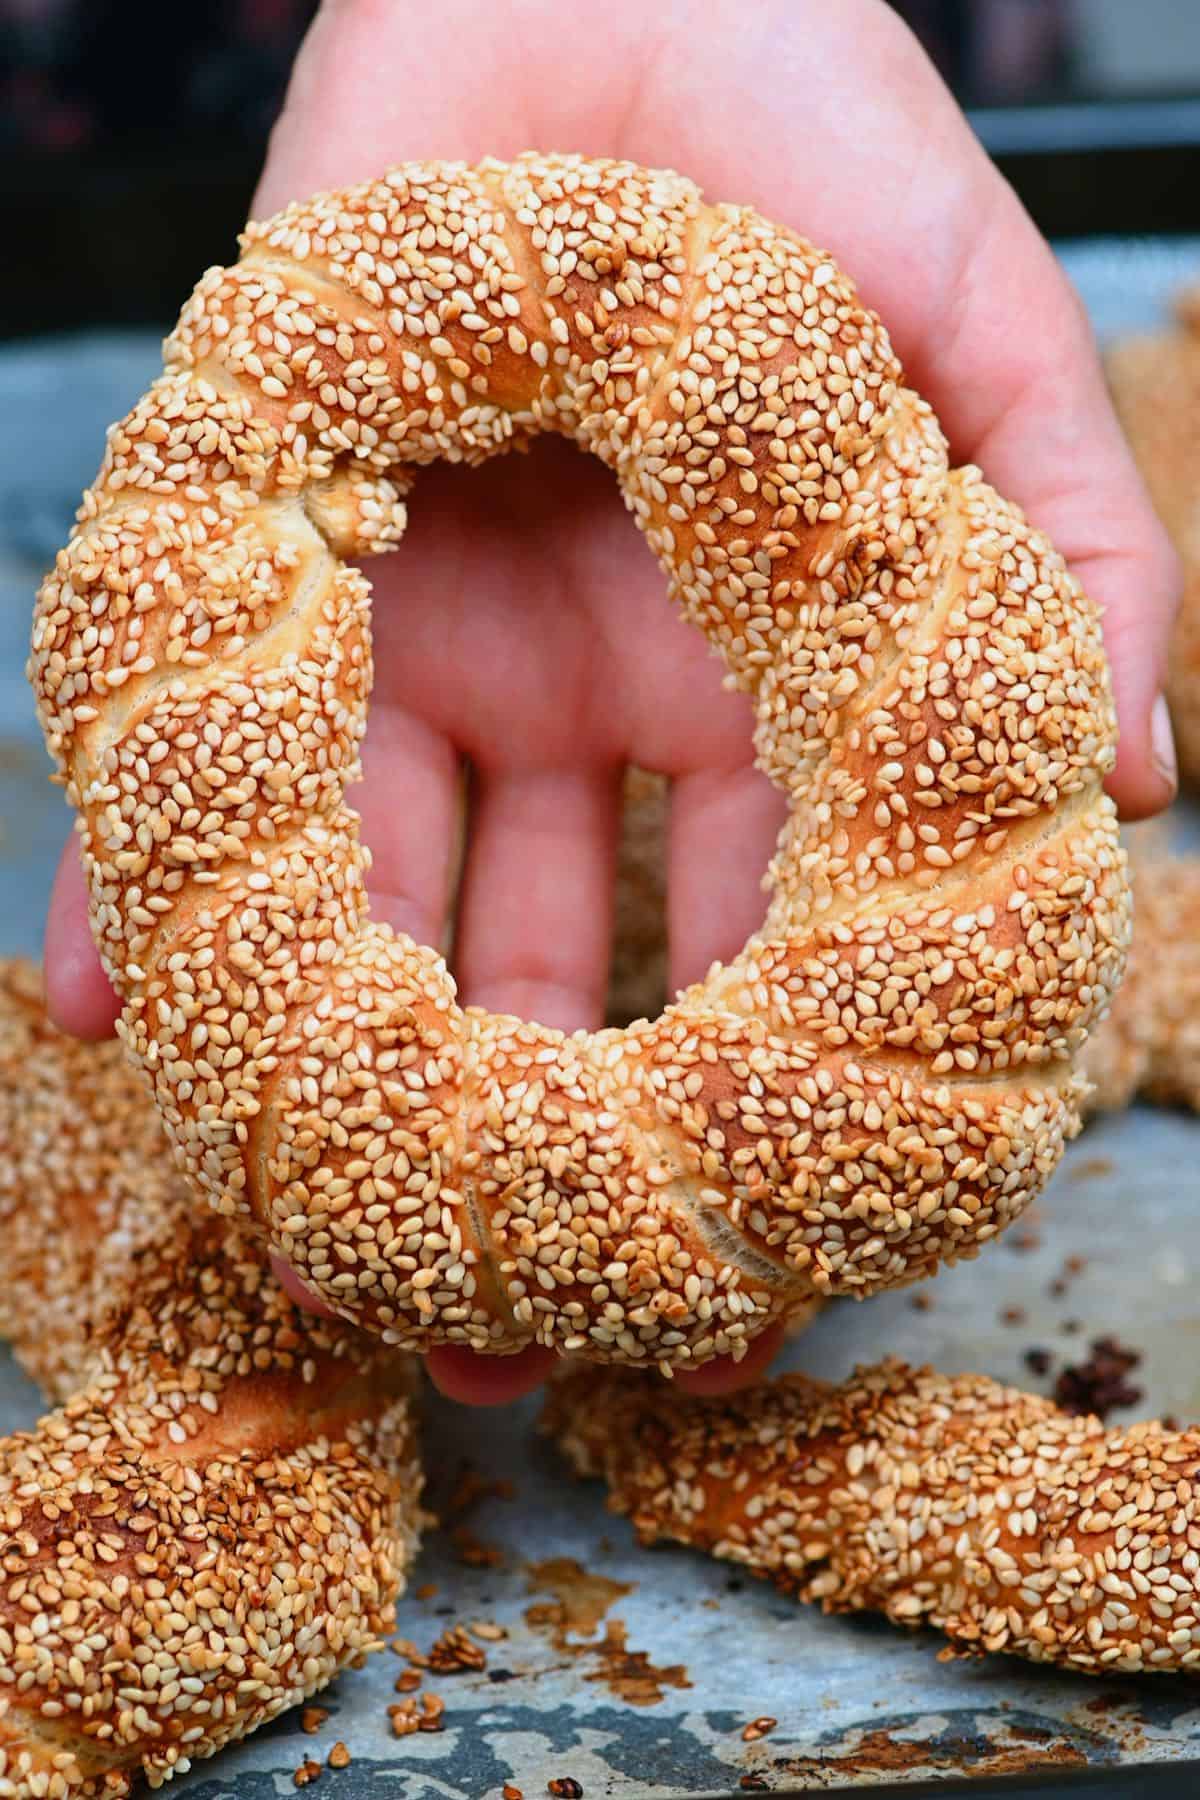 A hand holding a baked simit (turkish bagel)